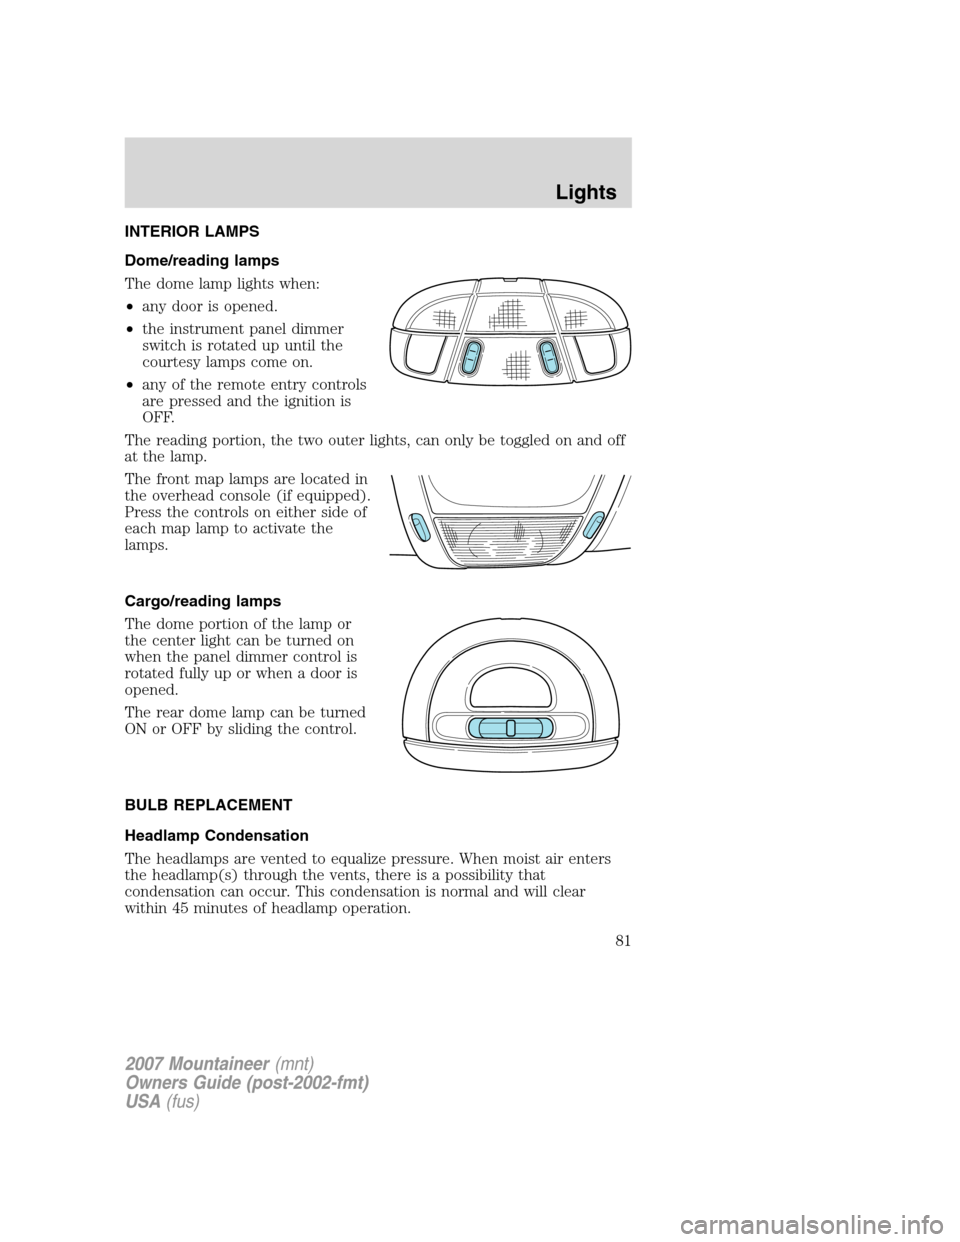 Mercury Mountaineer 2007  Owners Manuals INTERIOR LAMPS
Dome/reading lamps
The dome lamp lights when:
•any door is opened.
•the instrument panel dimmer
switch is rotated up until the
courtesy lamps come on.
•any of the remote entry con